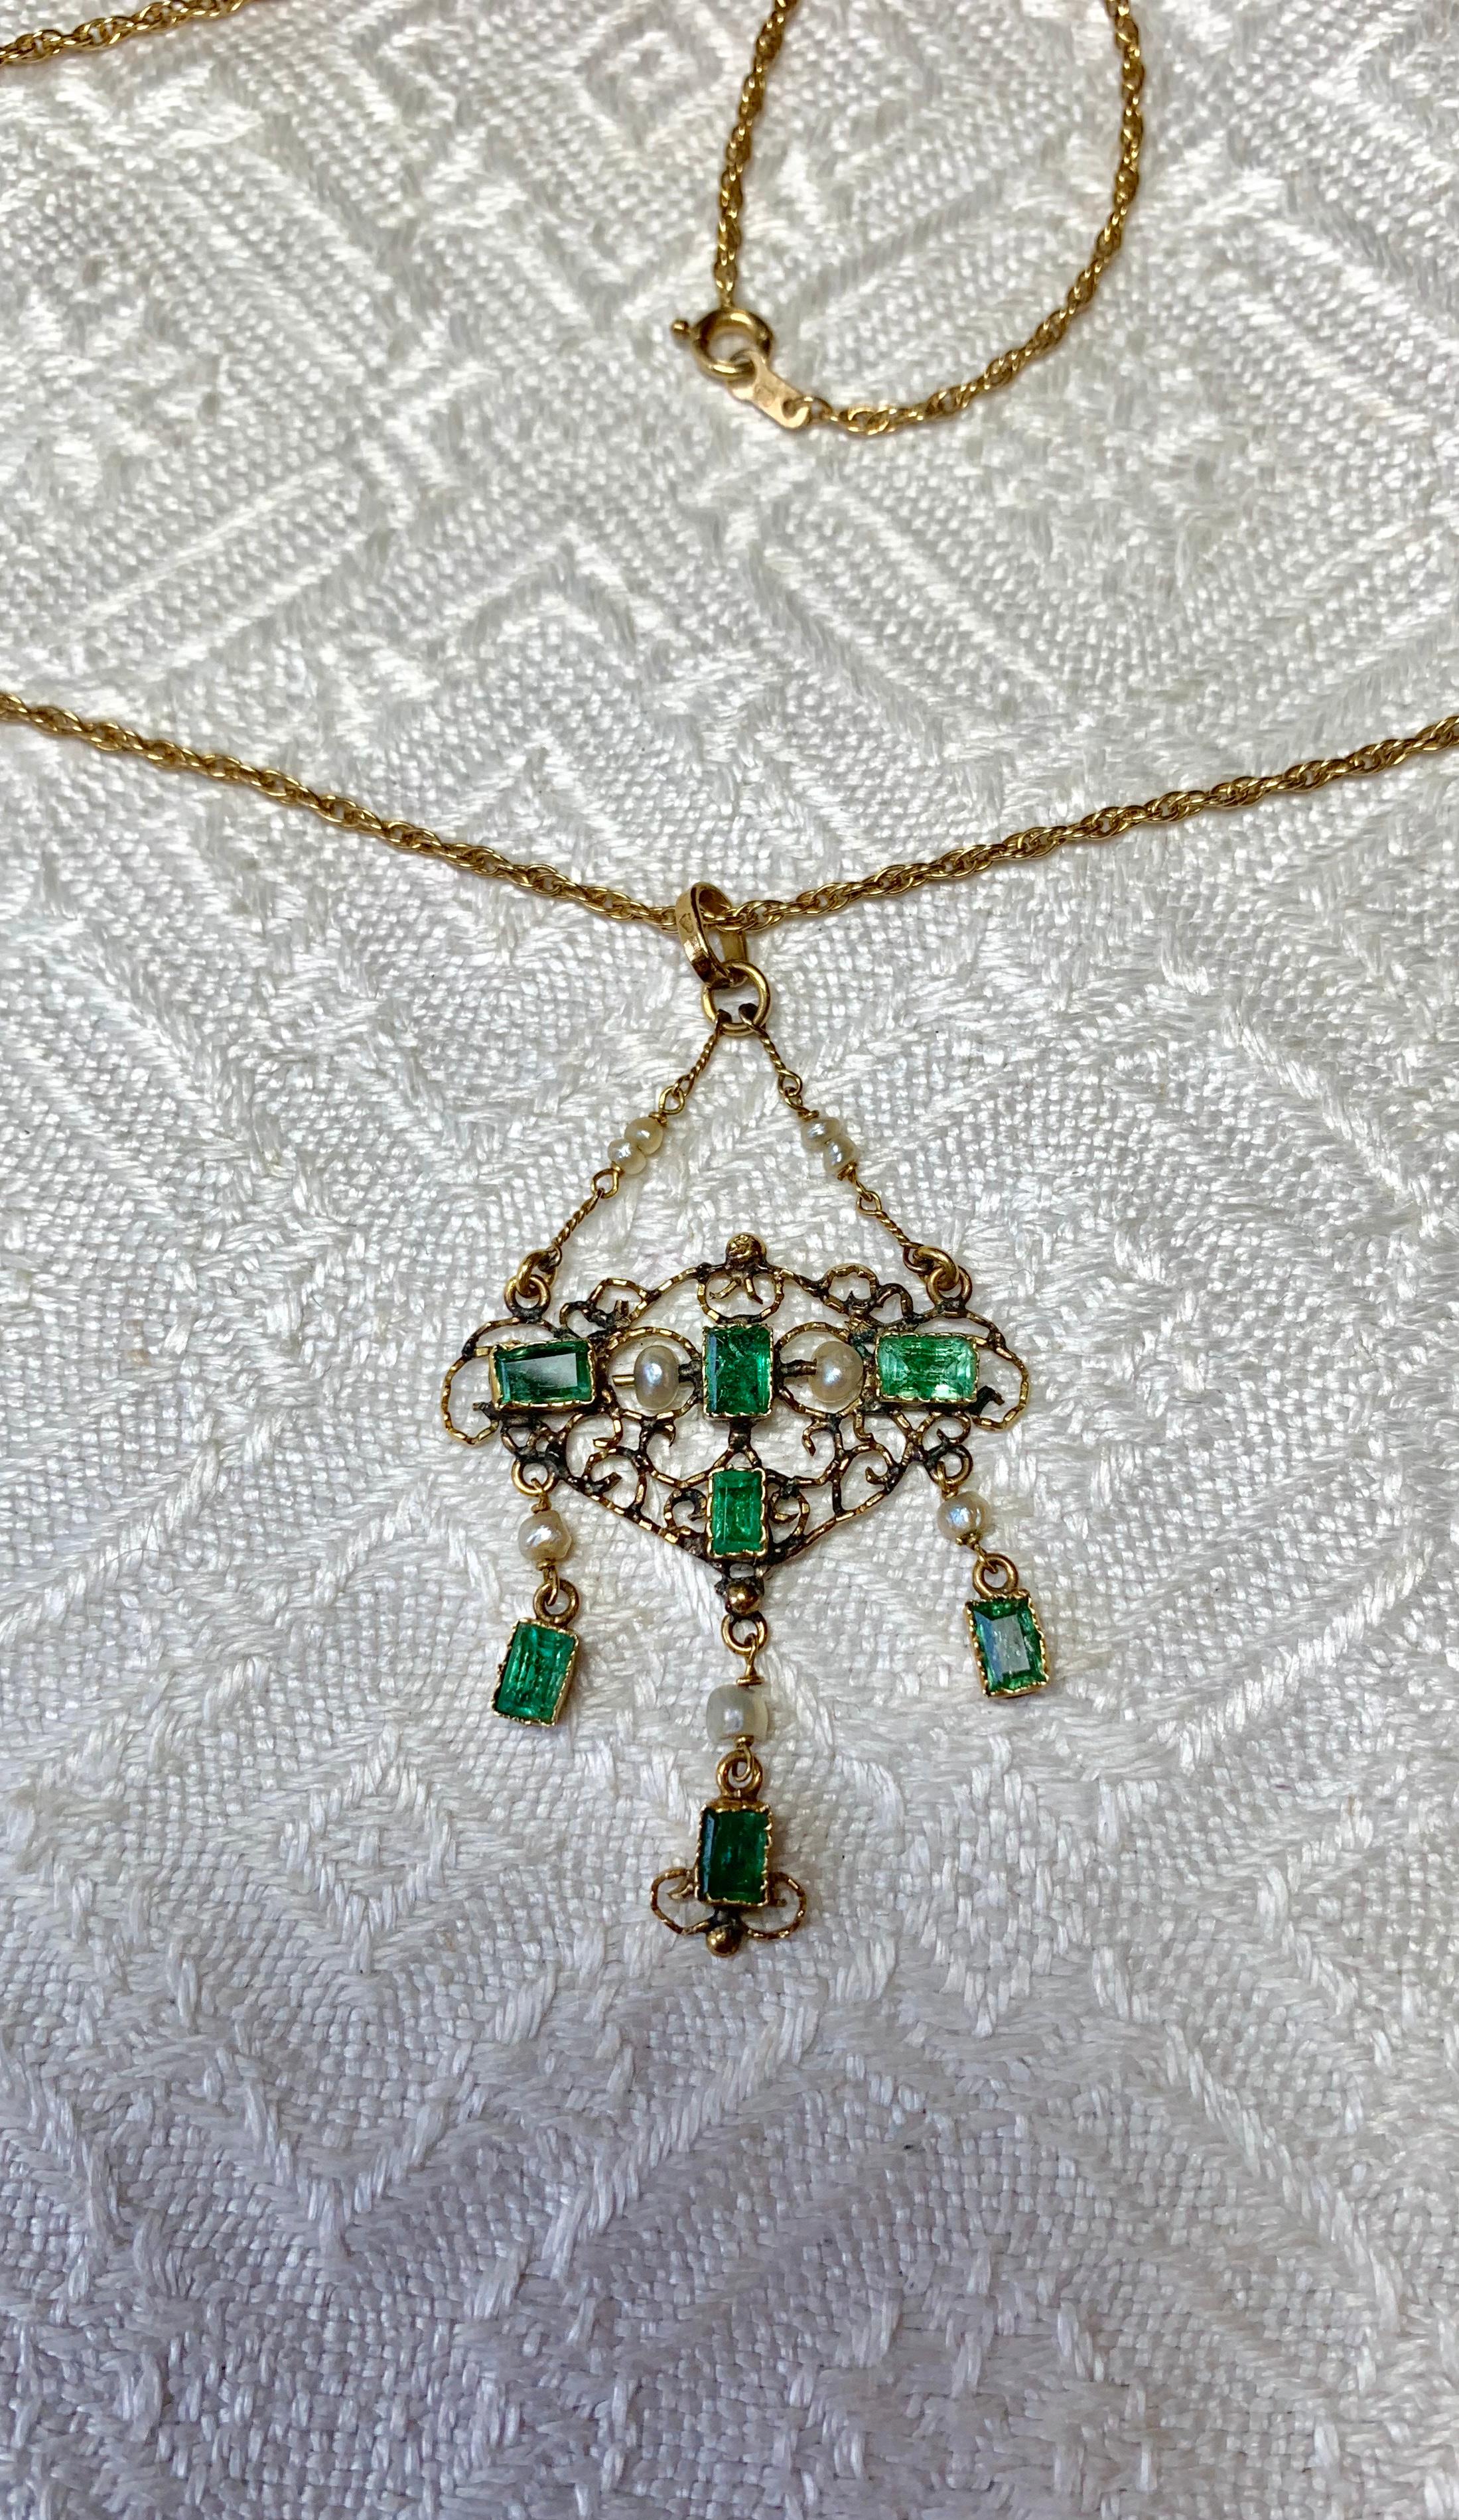 Antique Emerald Pearl Pendant Necklace 14 Karat Gold Renaissance Revival In Good Condition For Sale In New York, NY